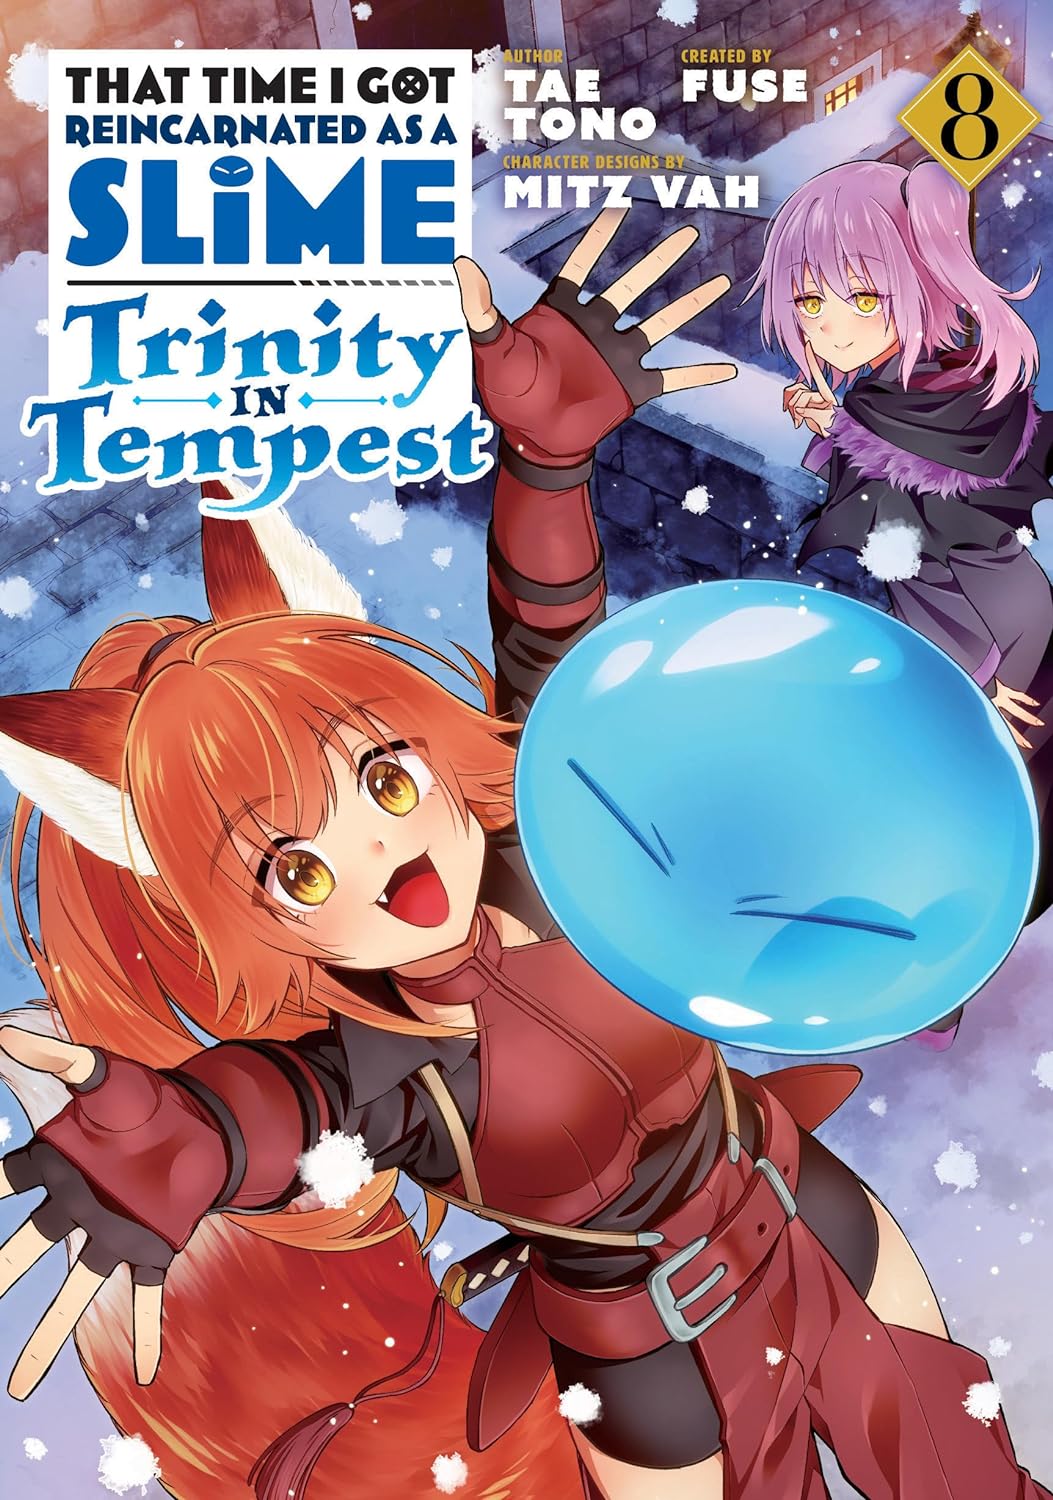 That Time I Got Reincarnated as a Slime: Trinity in Tempest (Manga) Vol. 08